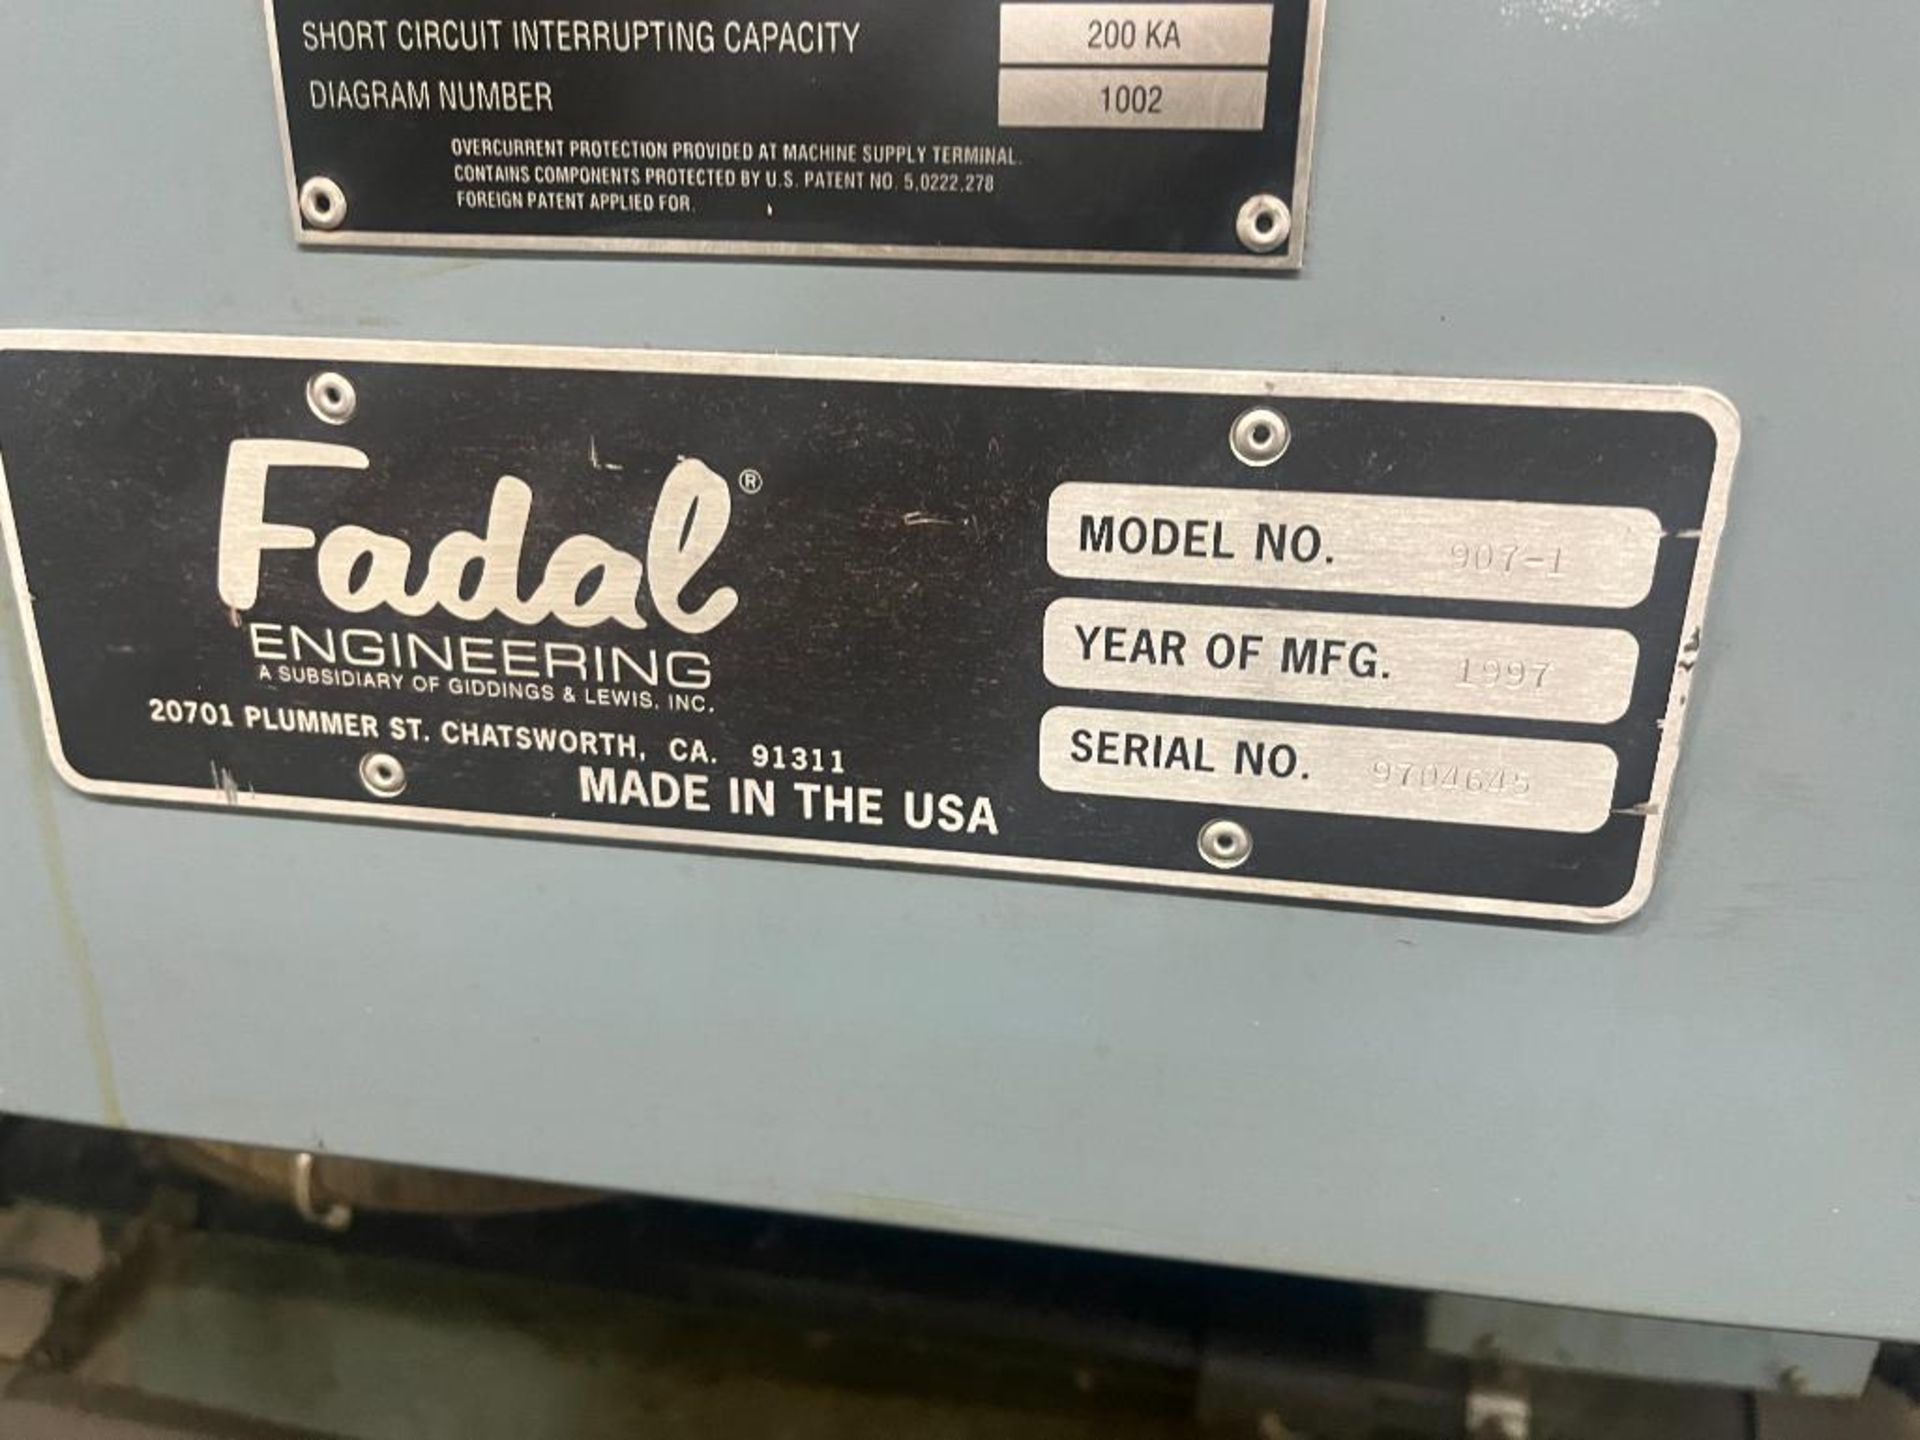 Fadal CNC Vertical Machining Center Model Model 907-1 VMC 6030HT, S/N 9704645 (1997) with Fadal CNC8 - Image 18 of 33